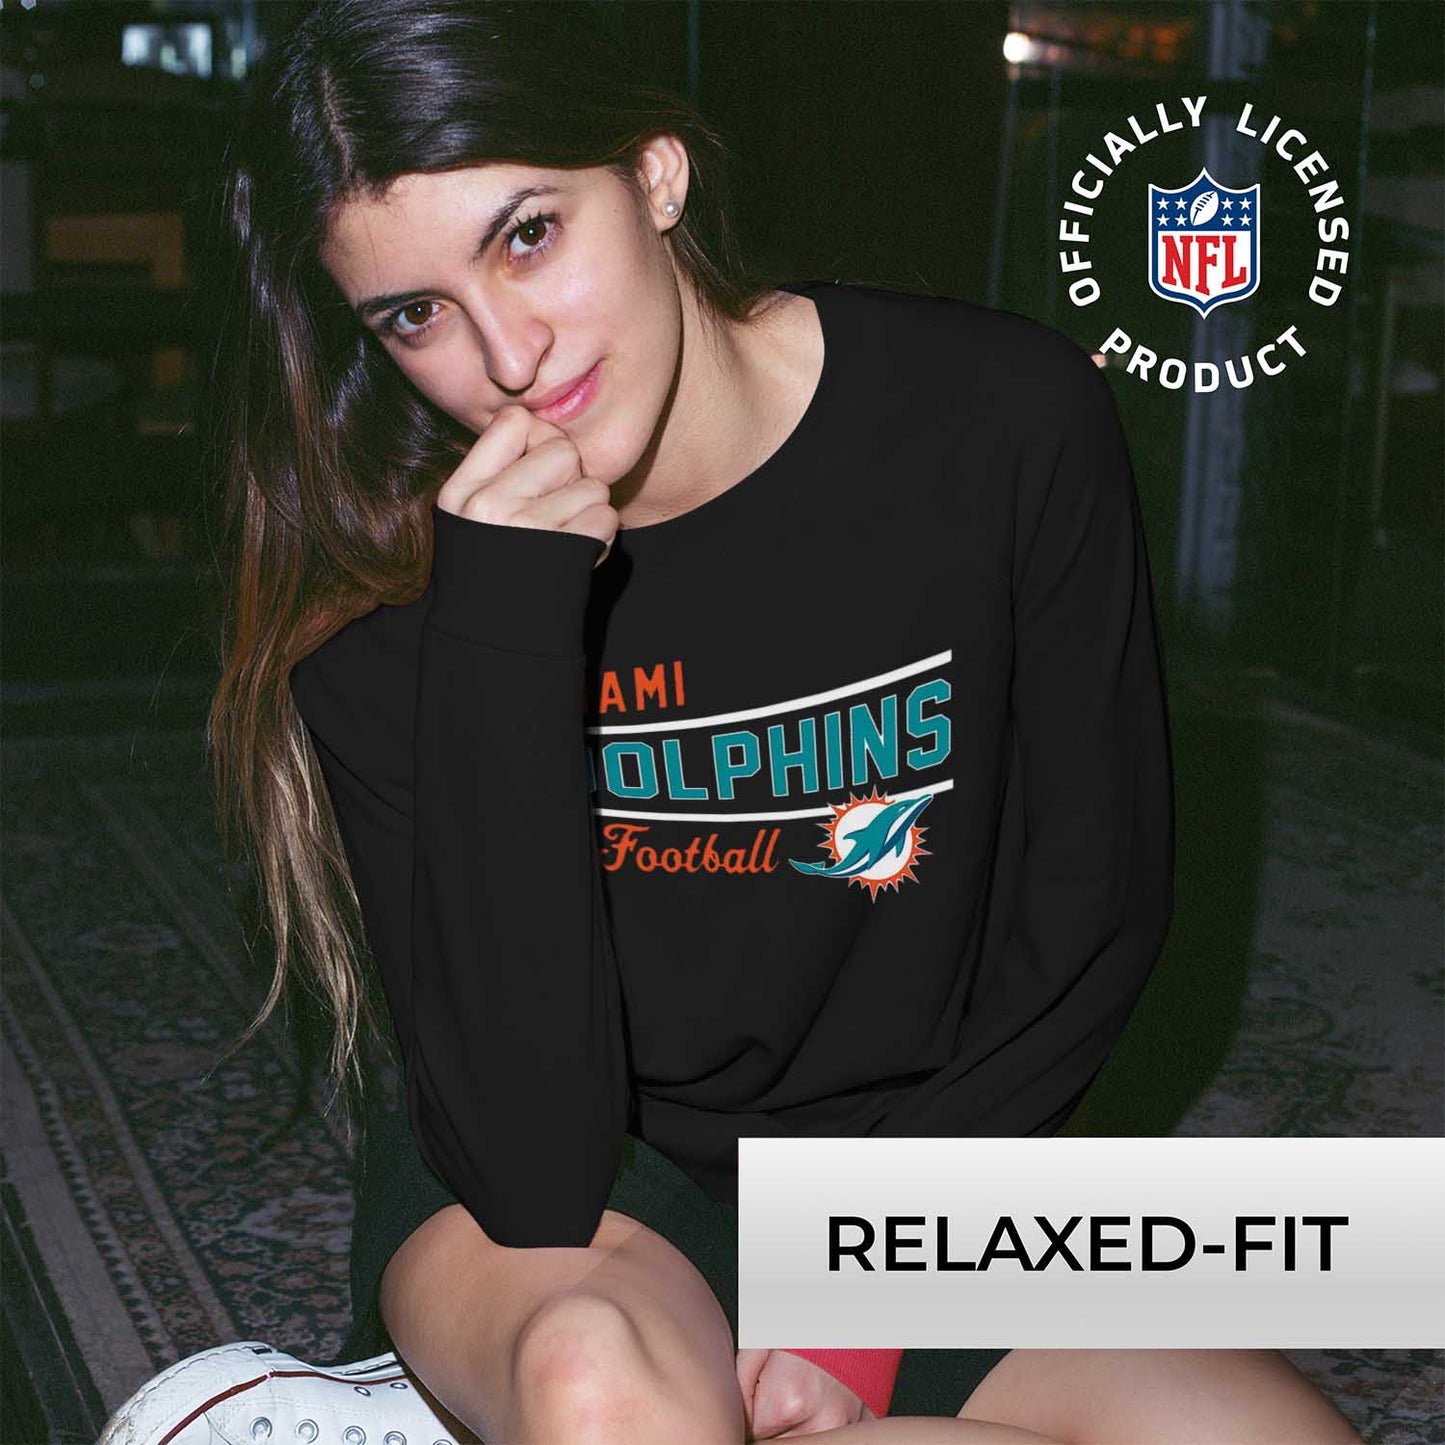 Miami Dolphins Miami Dolphins NFL Womens Crew Neck Light Weight